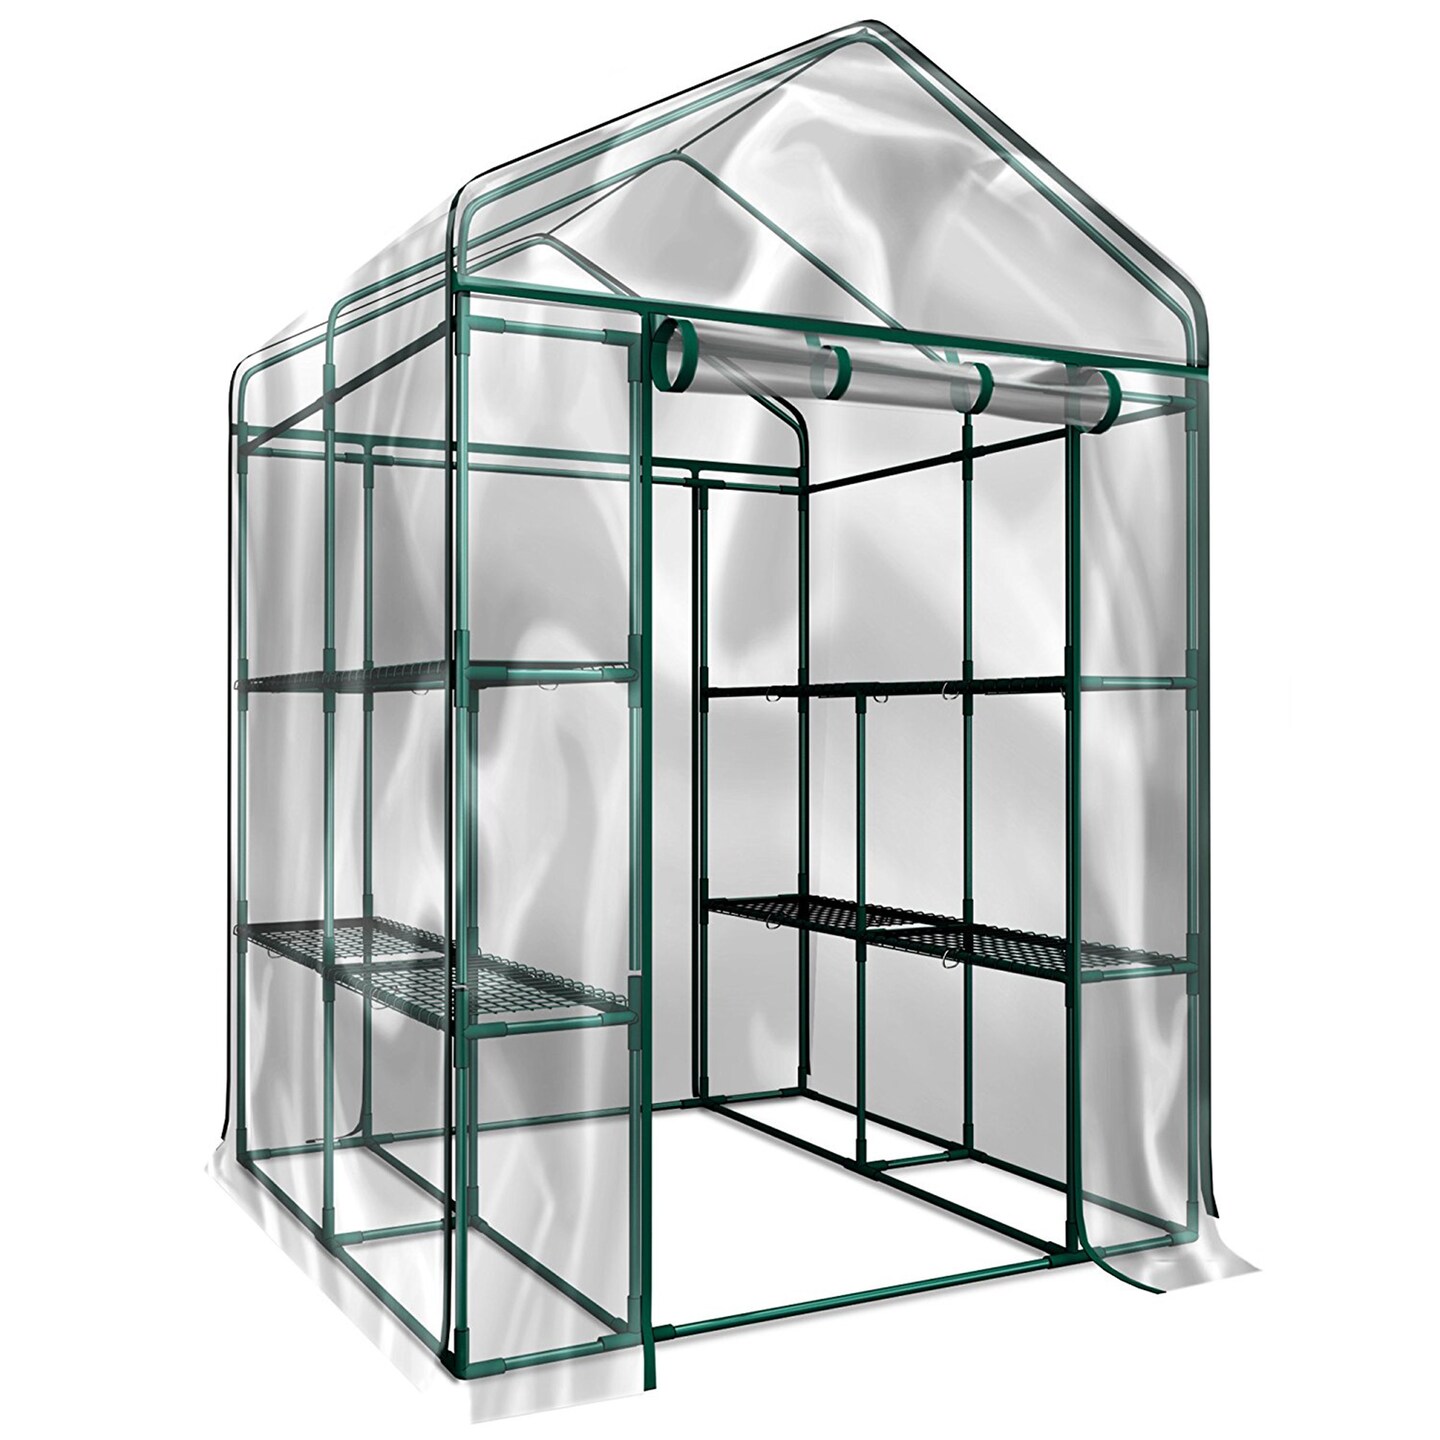 Home-Complete Walk-In Greenhouse- Indoor Outdoor with 8 Sturdy Shelves-Grow Plants Seedlings Herbs or Flowers